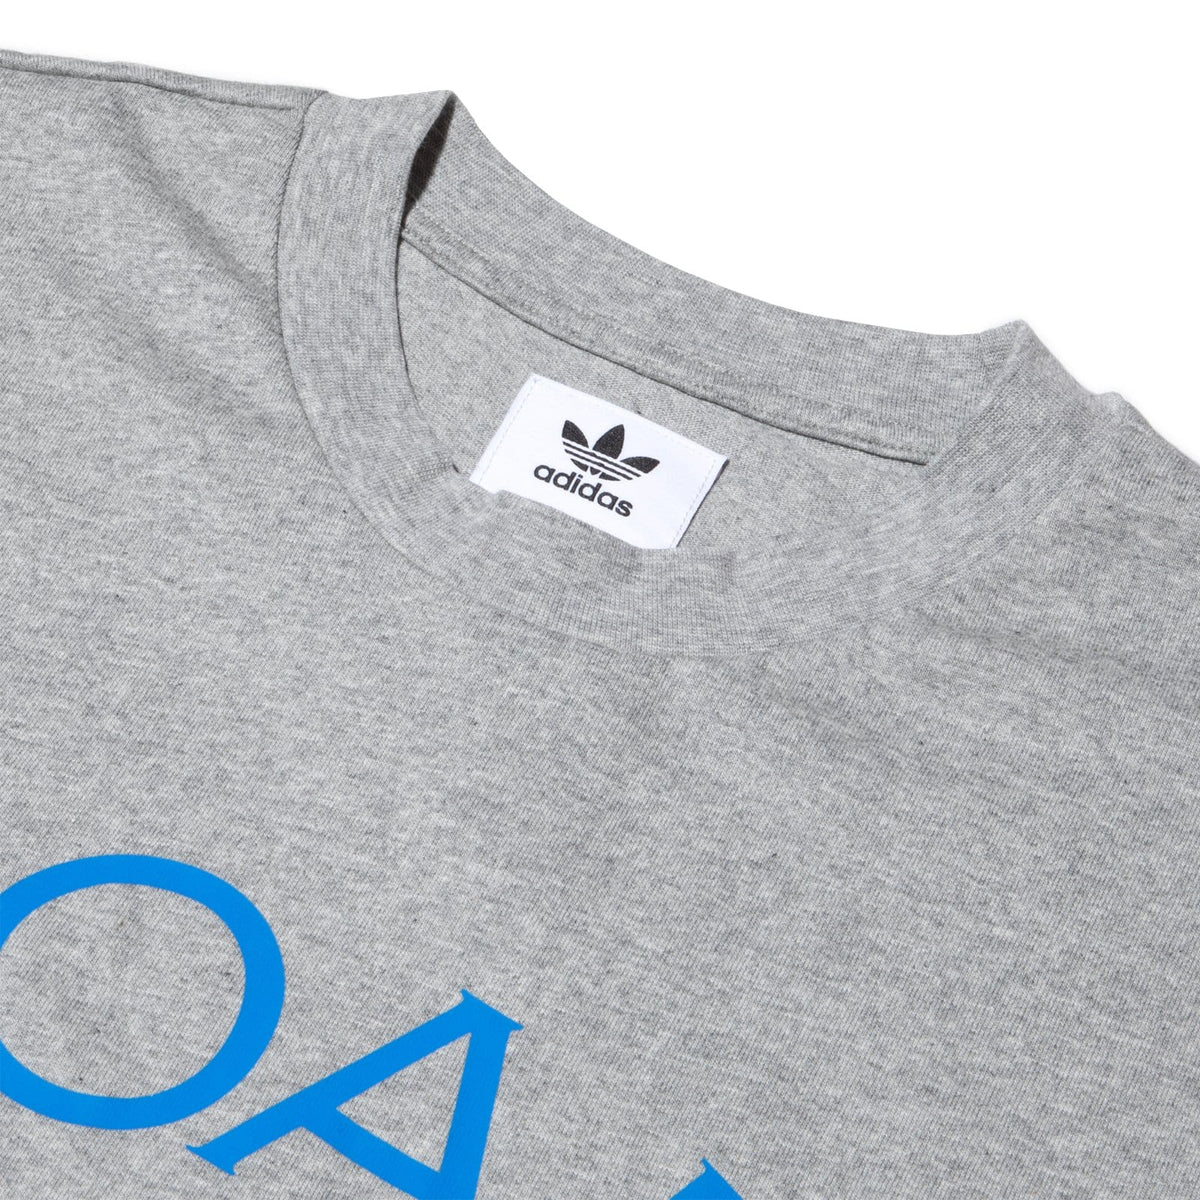 adidas t shirt with trainers on it